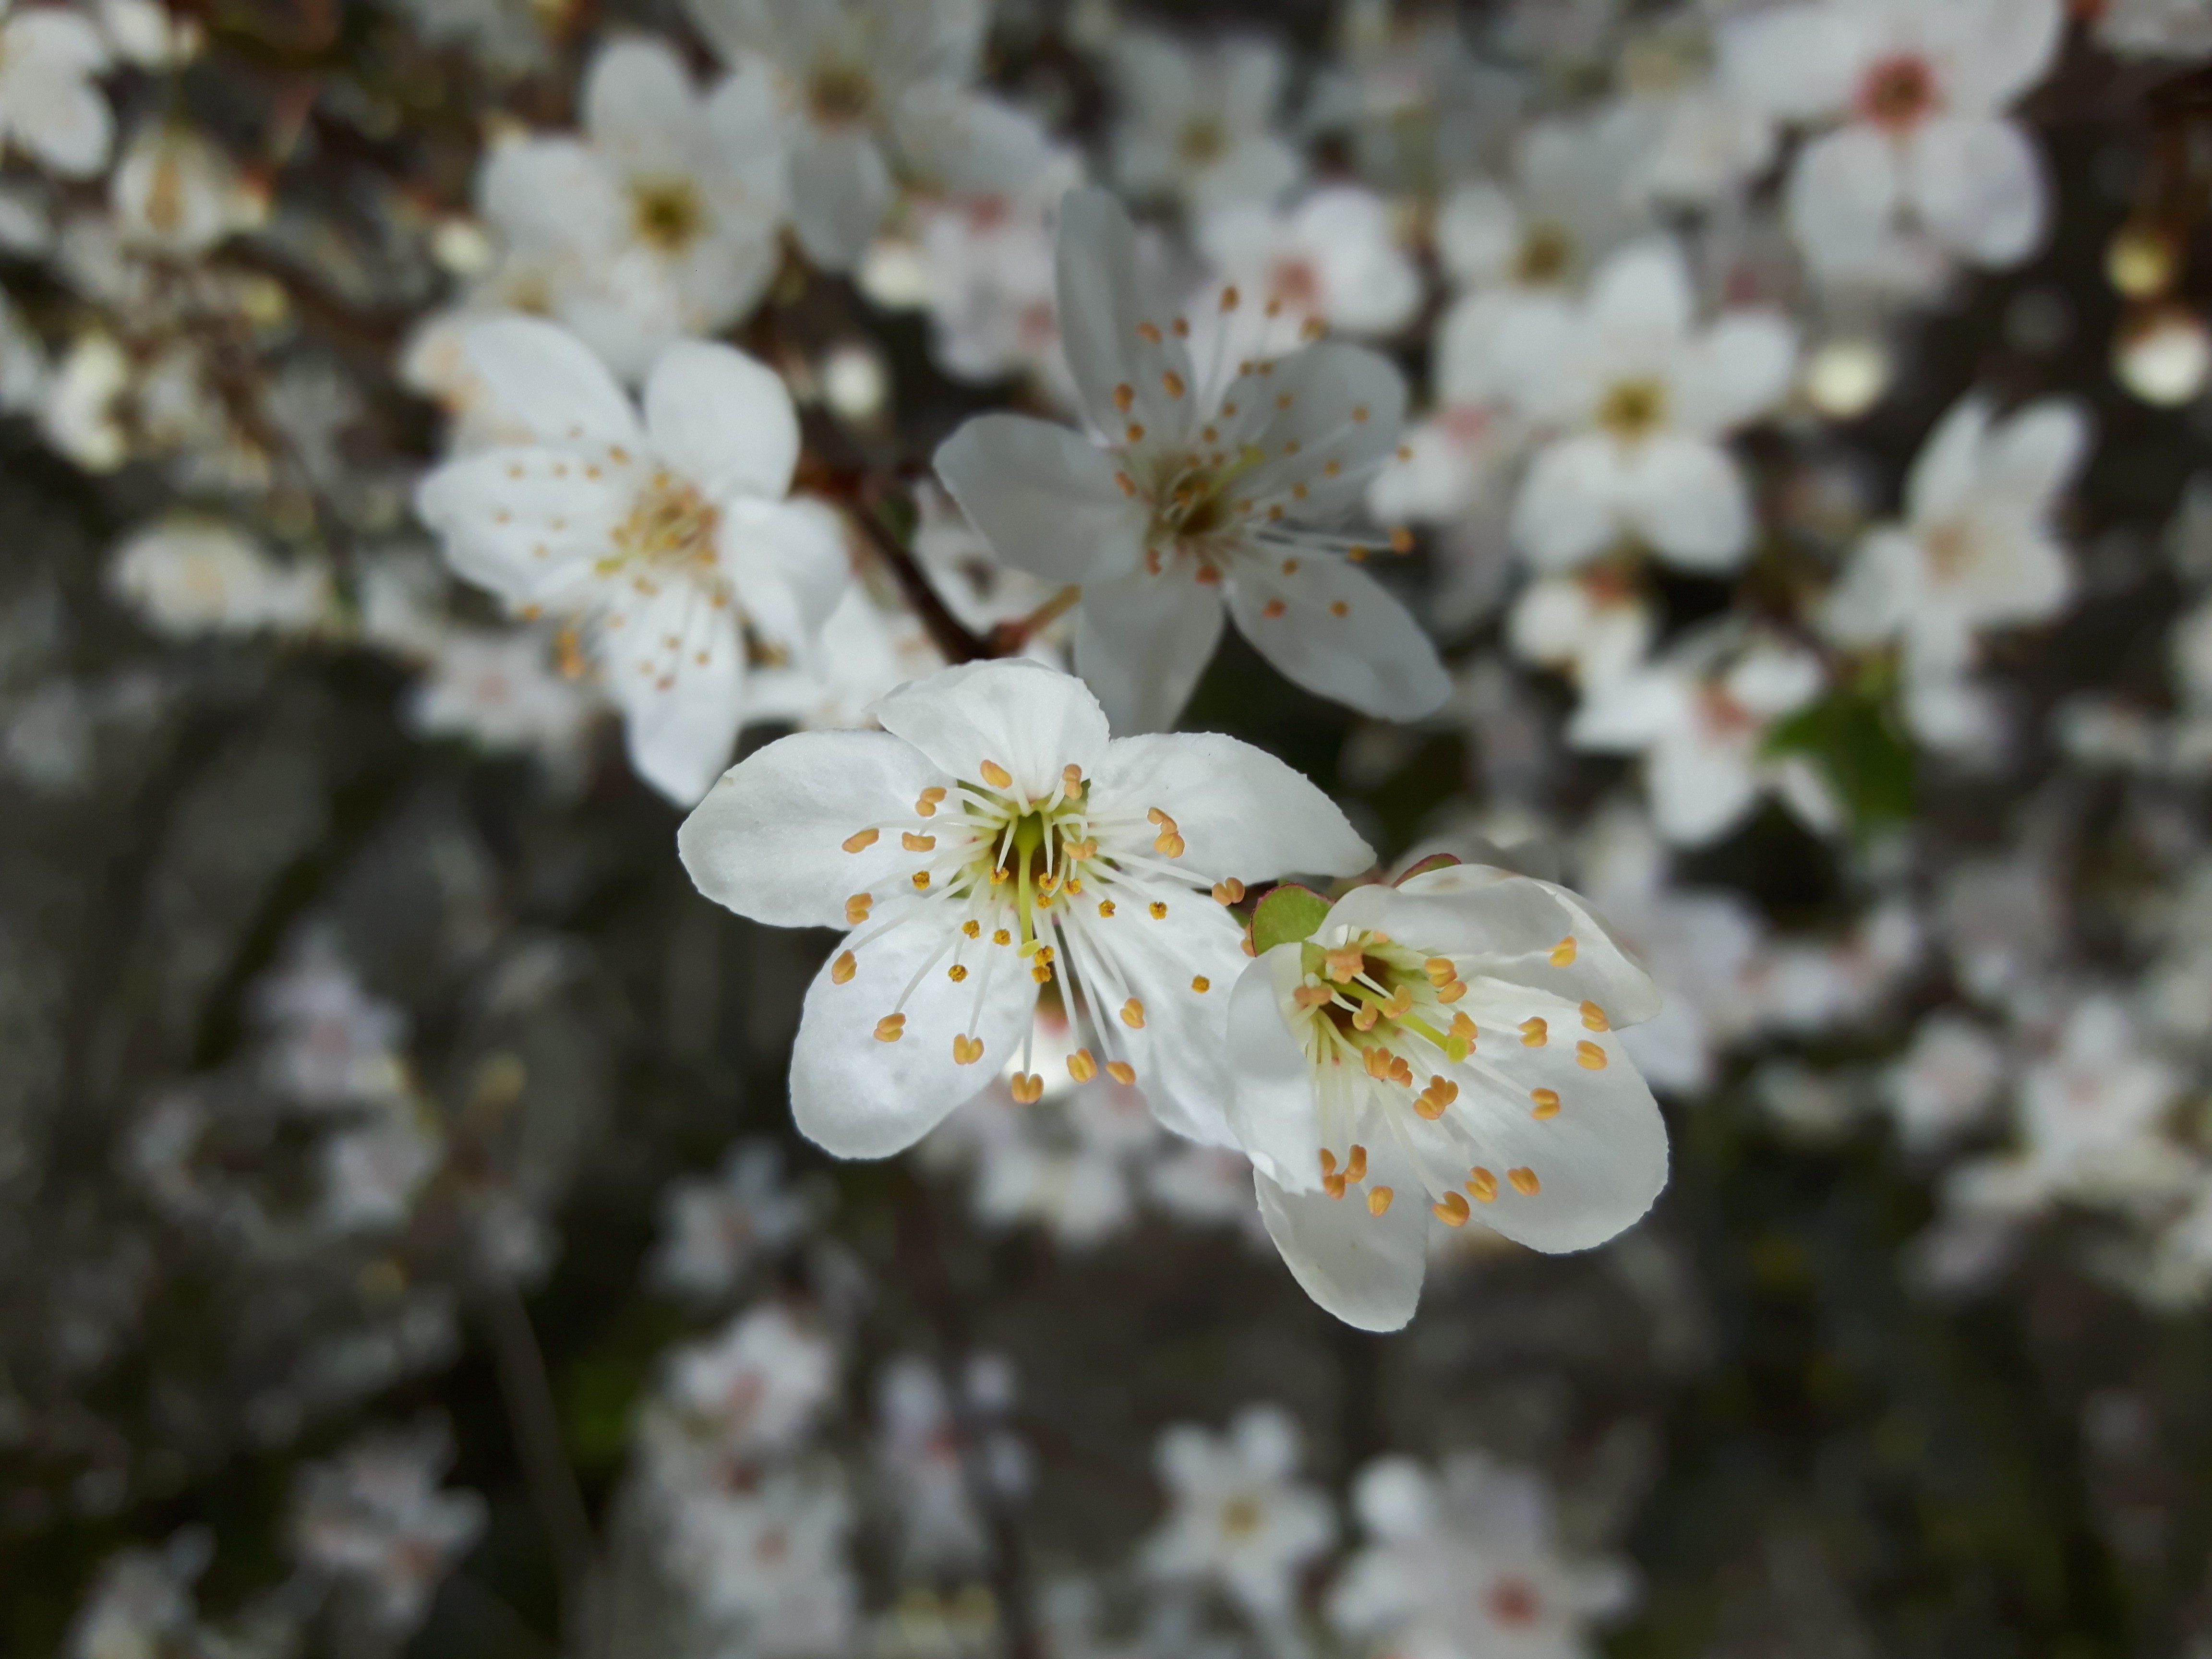 Flowers Nature Blossoms Spring White Flowers 4608x3456